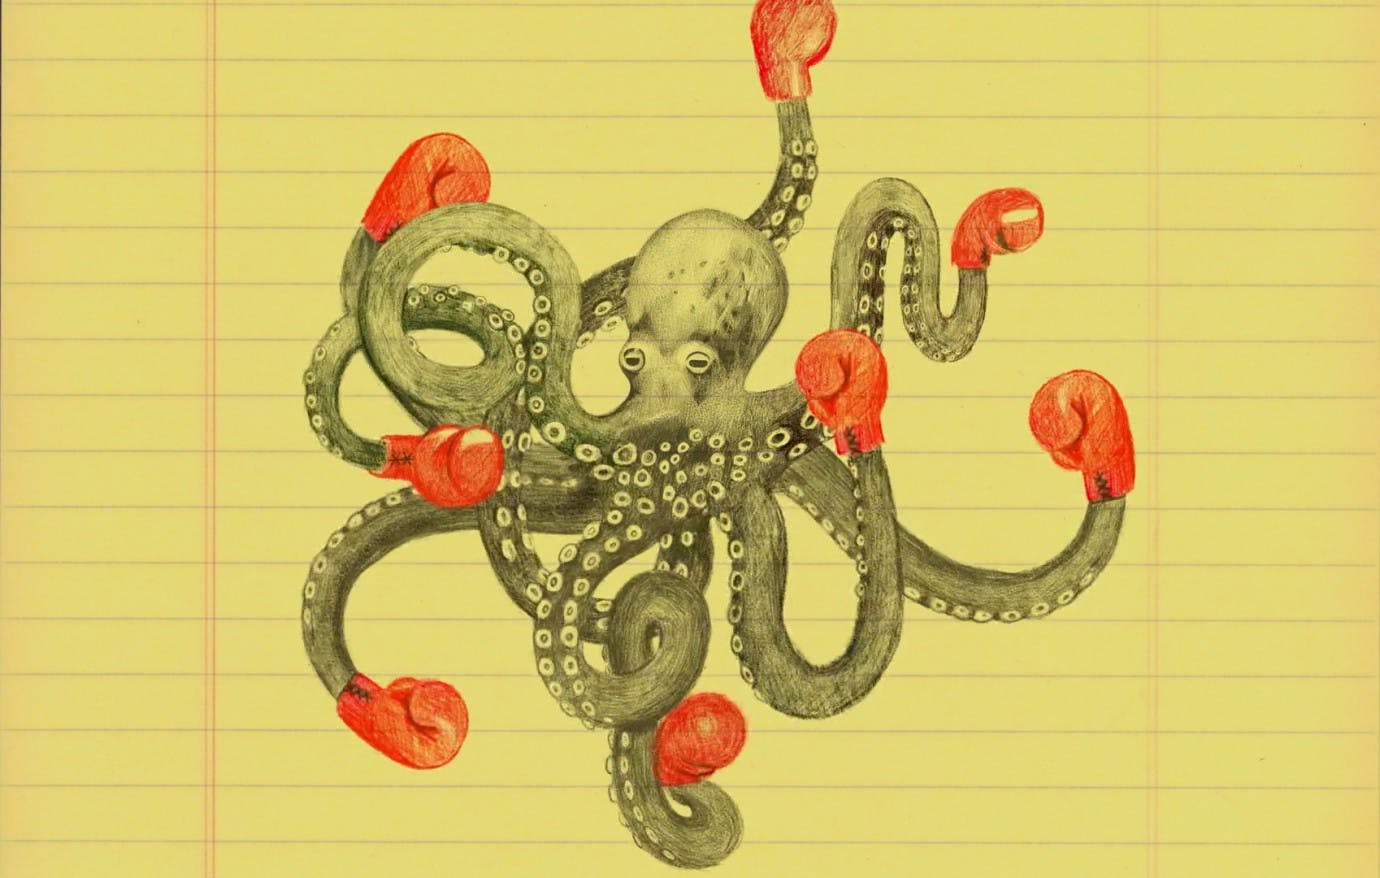 A pencil drawing on lined yellow paper depicting an octopus with bright red boxing gloves at the end of each tentacle